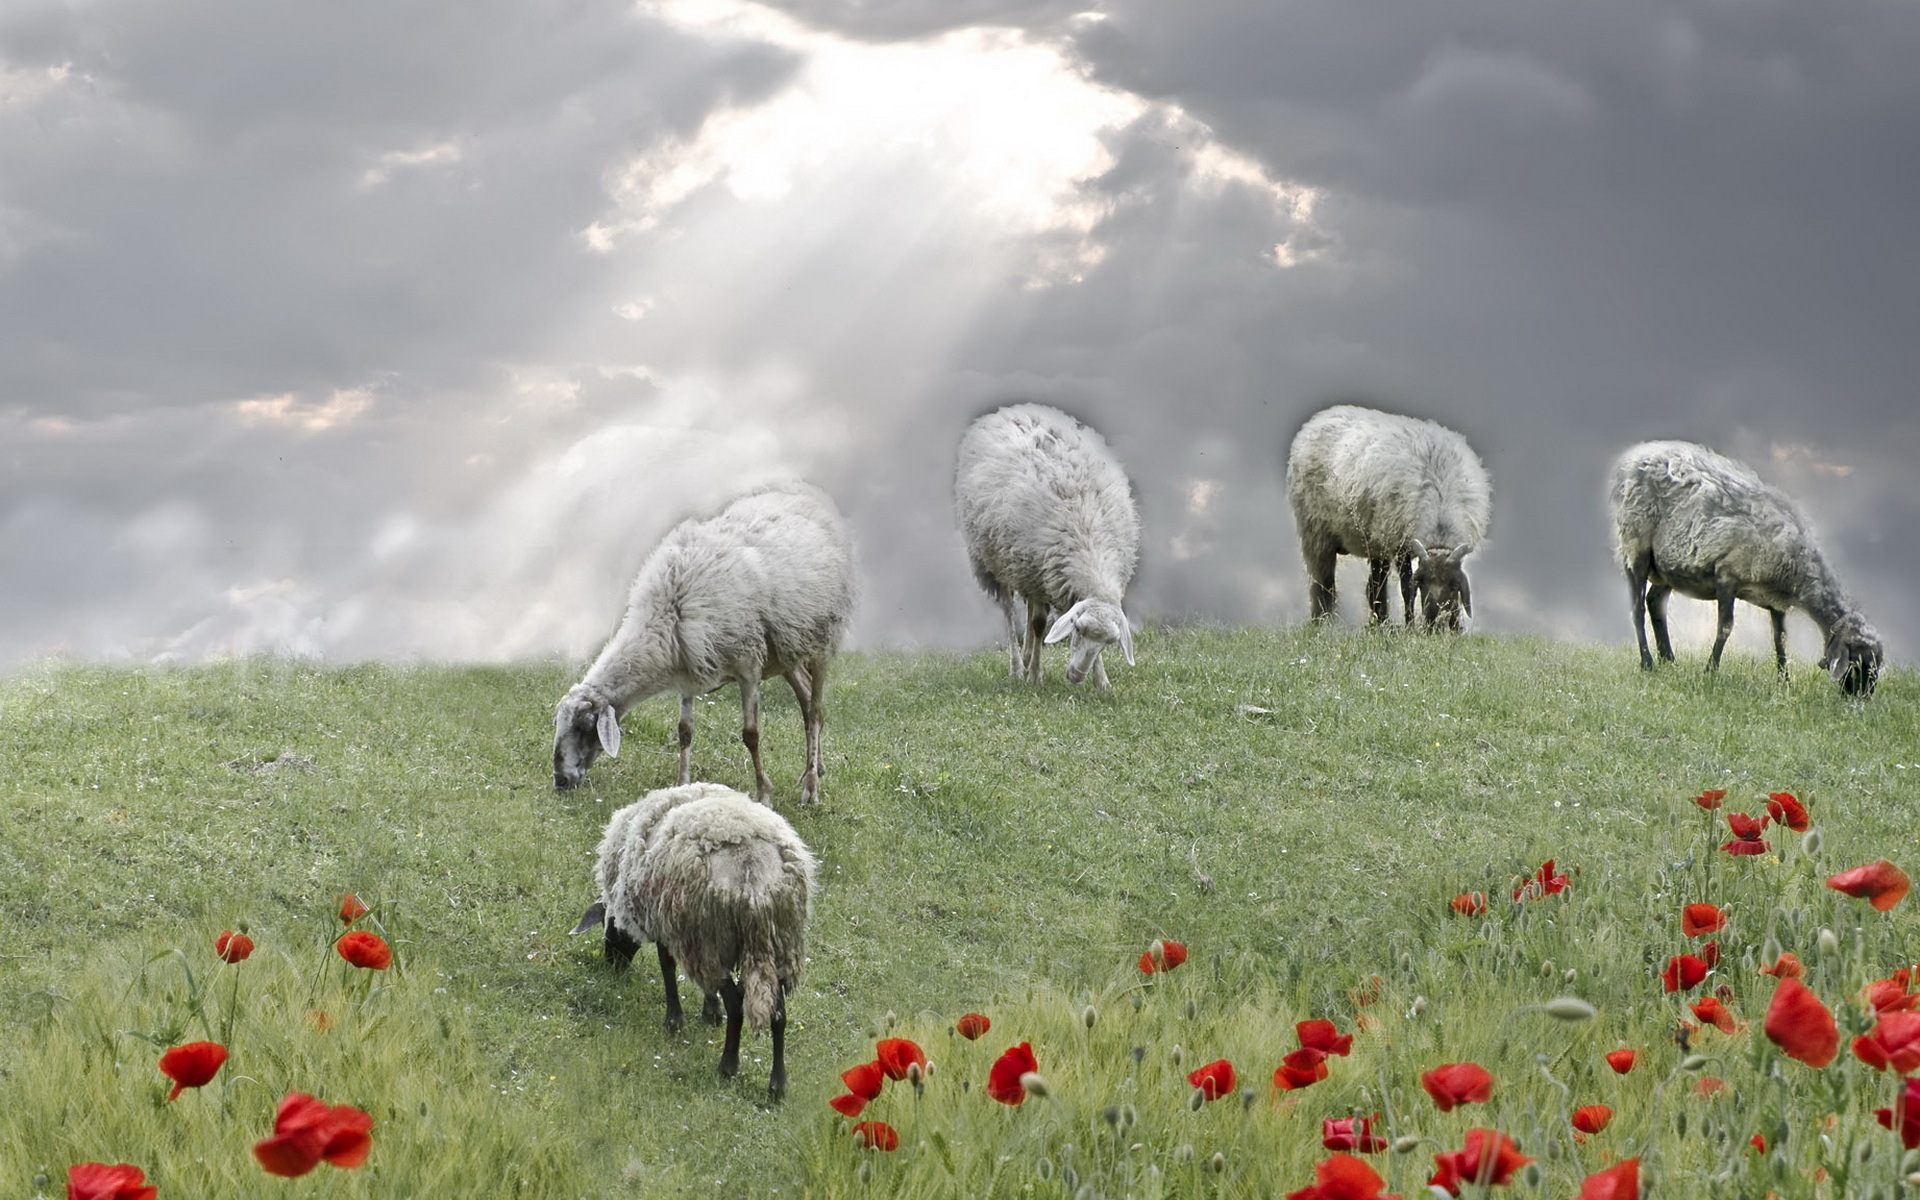 sheep, Field, Poppies, Sky, Clouds, Sunlight, Manipulation, Landscapes Wallpaper